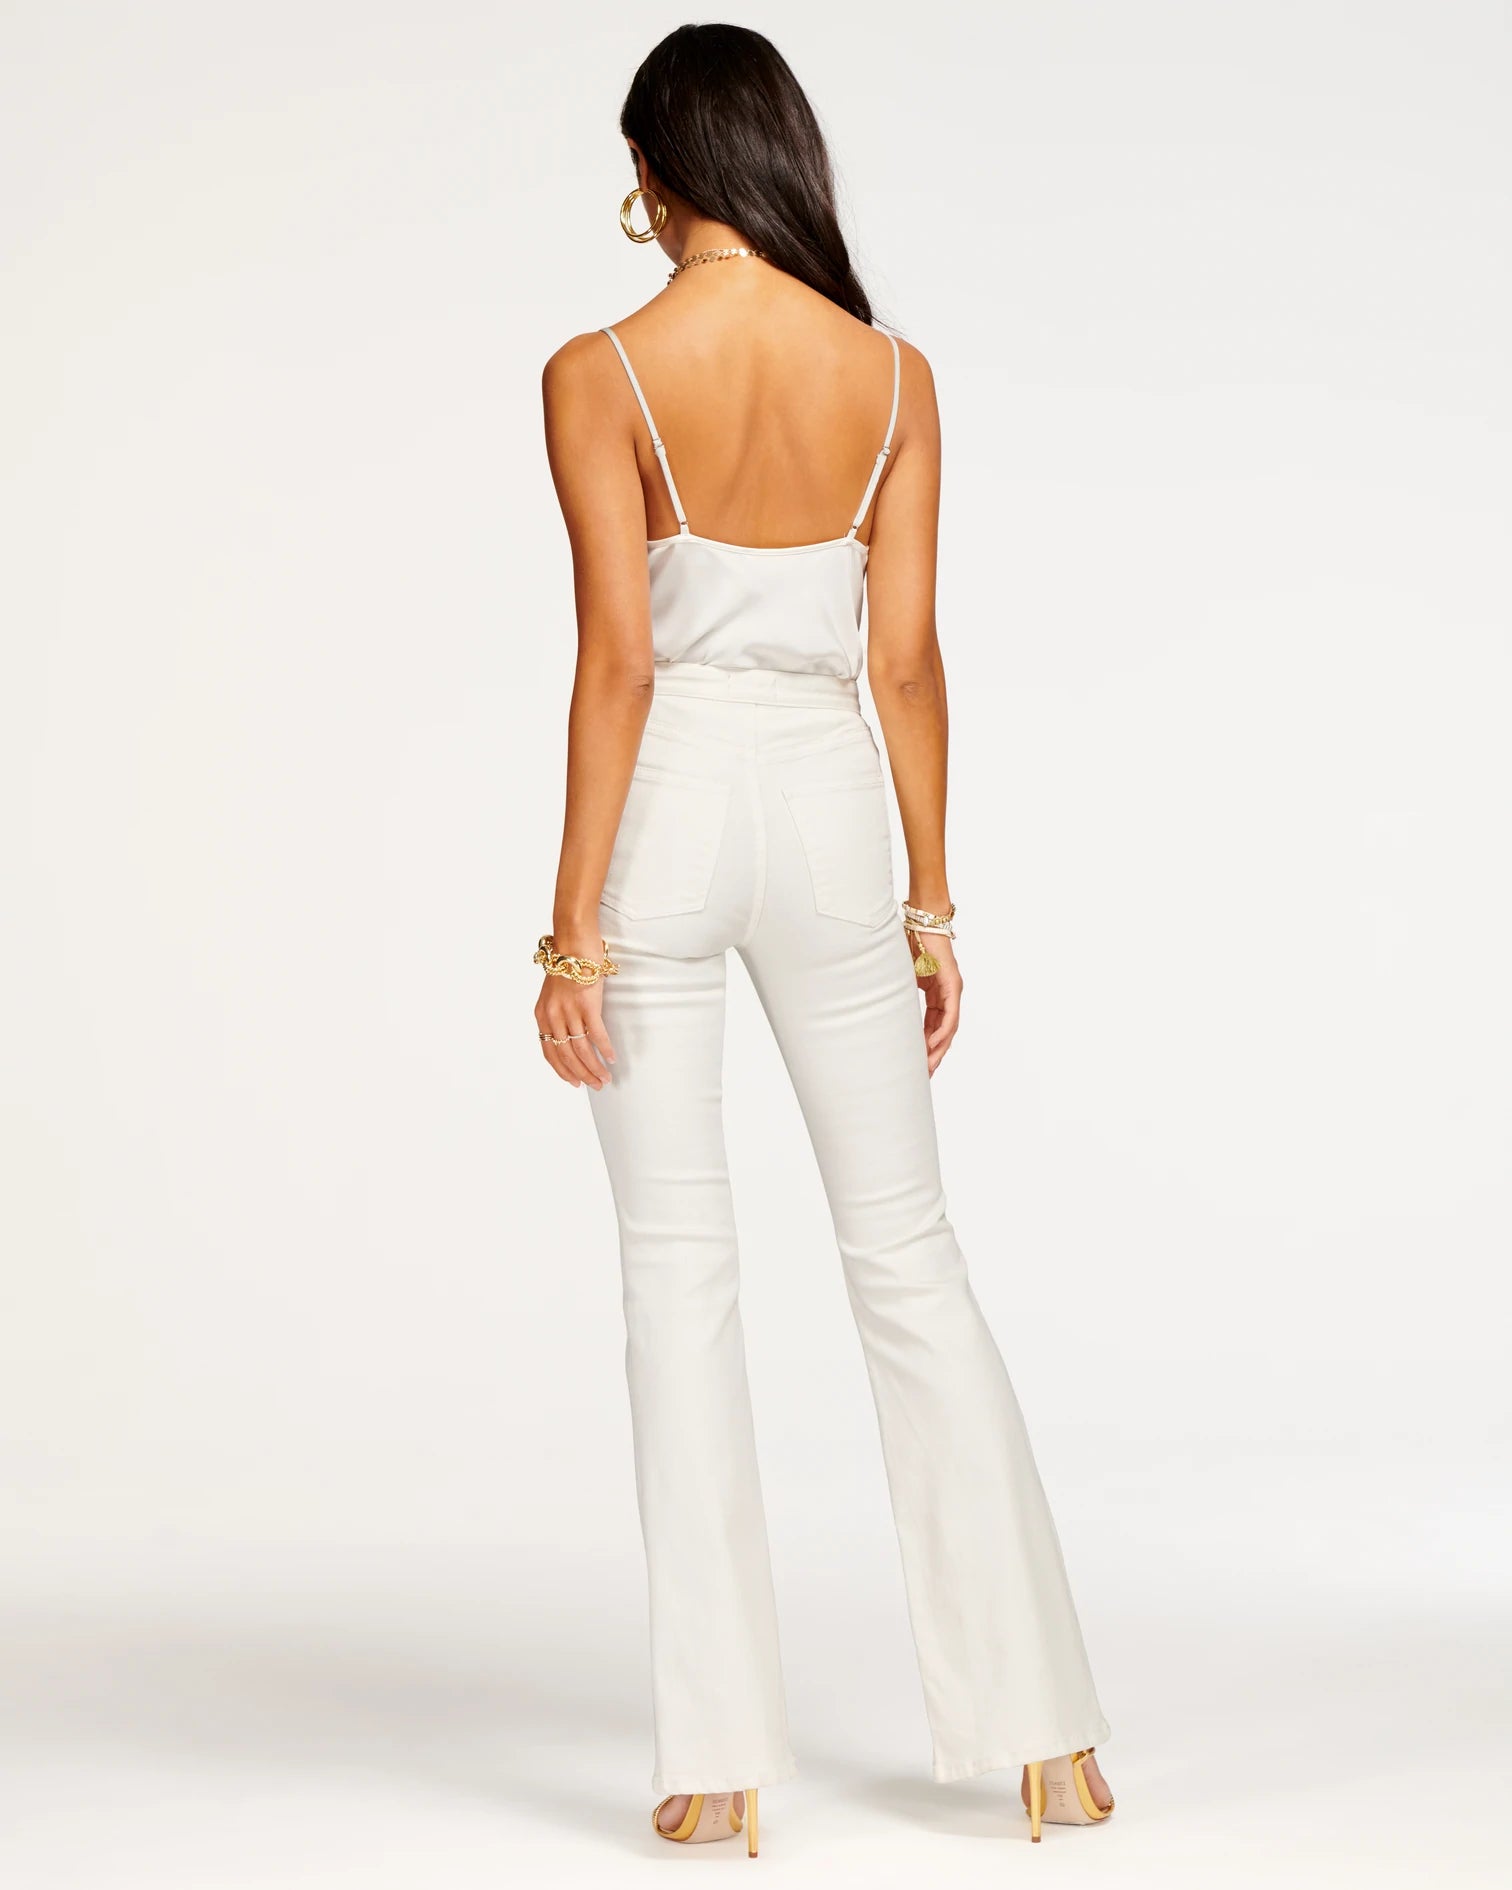 Beatrix High Waisted Flare Jean in white